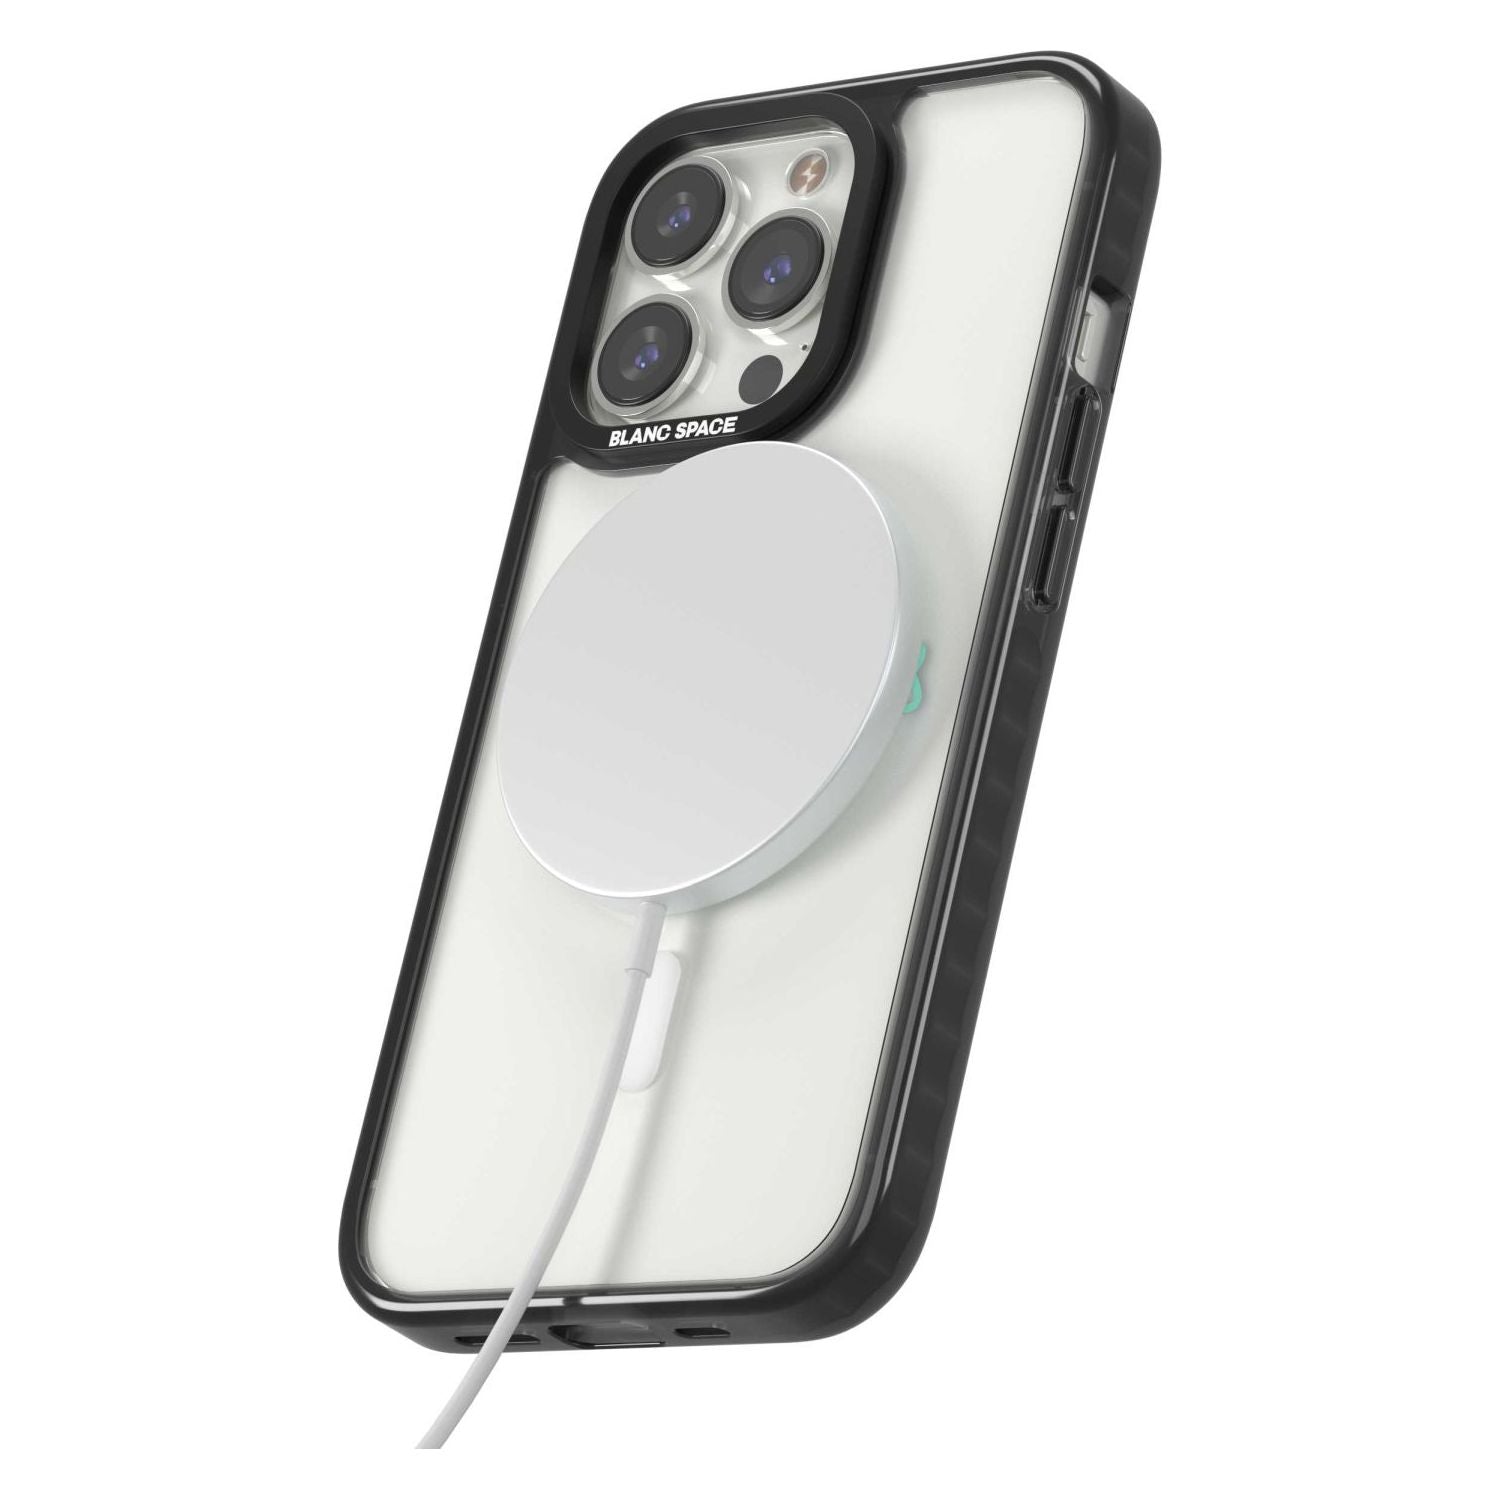 Not Perfect - Clear Phone Case iPhone 15 Pro Max / Black Impact Case,iPhone 15 Plus / Black Impact Case,iPhone 15 Pro / Black Impact Case,iPhone 15 / Black Impact Case,iPhone 15 Pro Max / Impact Case,iPhone 15 Plus / Impact Case,iPhone 15 Pro / Impact Case,iPhone 15 / Impact Case,iPhone 15 Pro Max / Magsafe Black Impact Case,iPhone 15 Plus / Magsafe Black Impact Case,iPhone 15 Pro / Magsafe Black Impact Case,iPhone 15 / Magsafe Black Impact Case,iPhone 14 Pro Max / Black Impact Case,iPhone 14 Plus / Black I